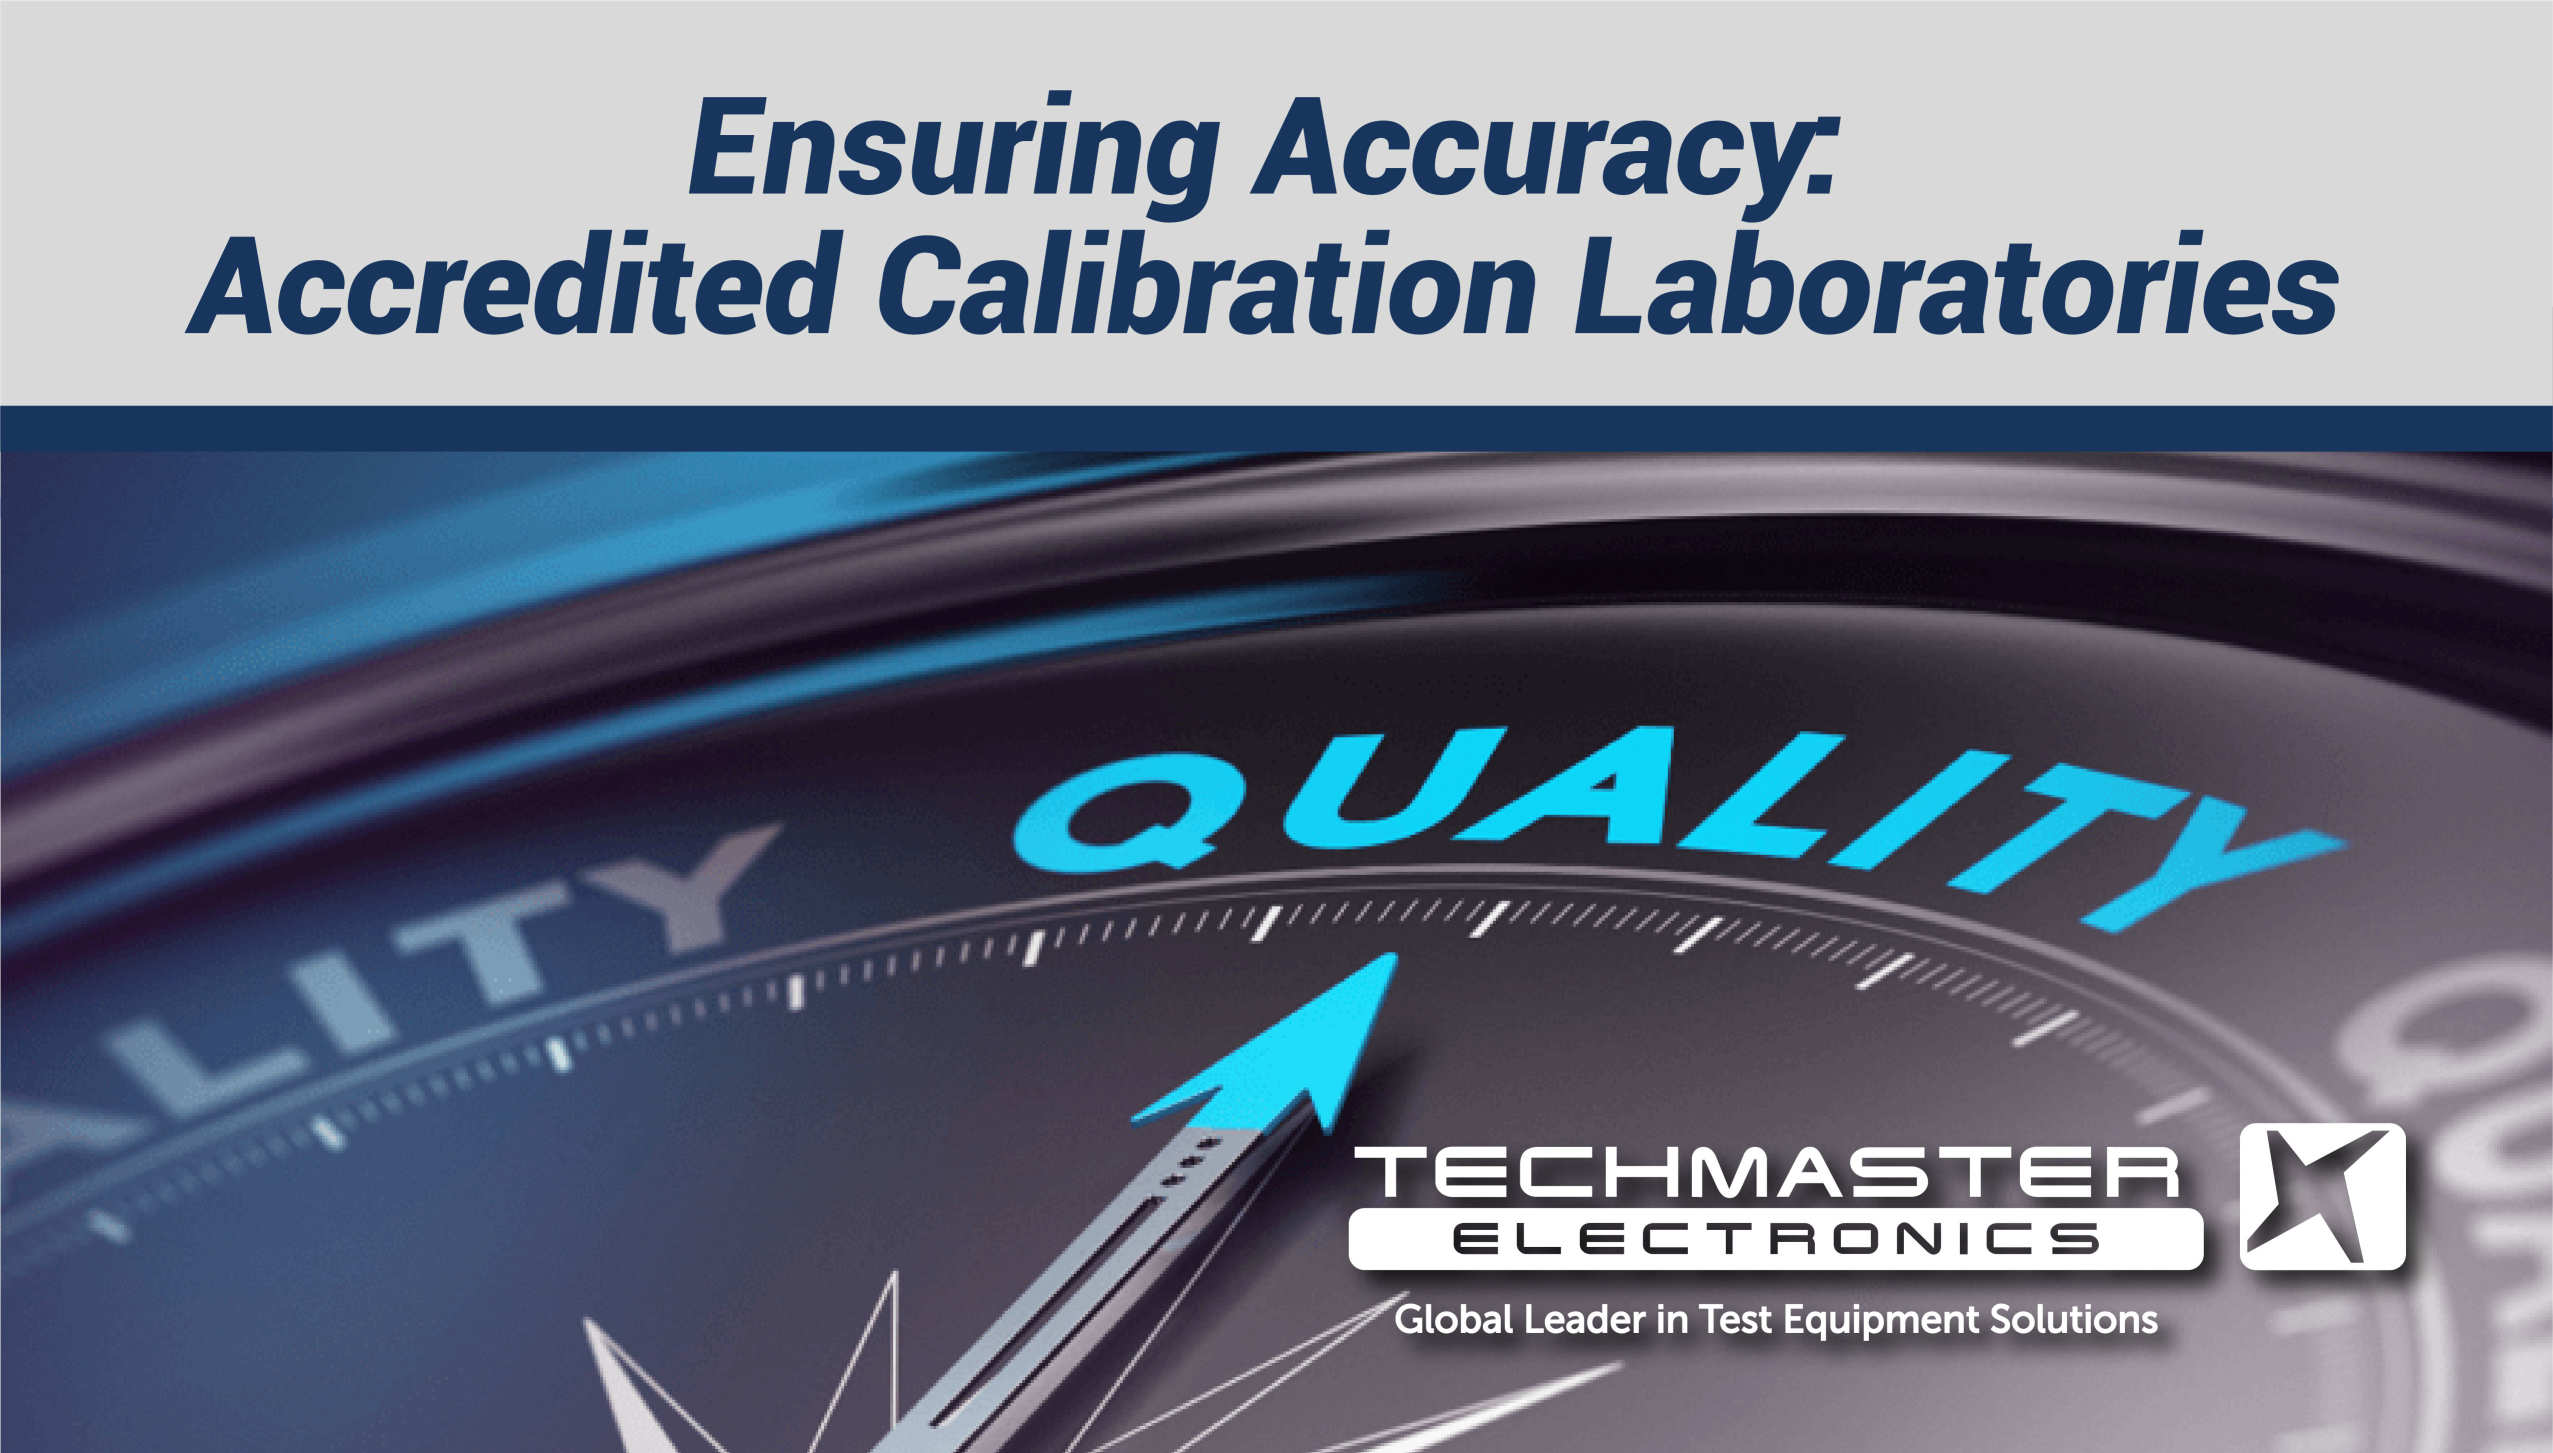 What is an accredited calibration laboratory?